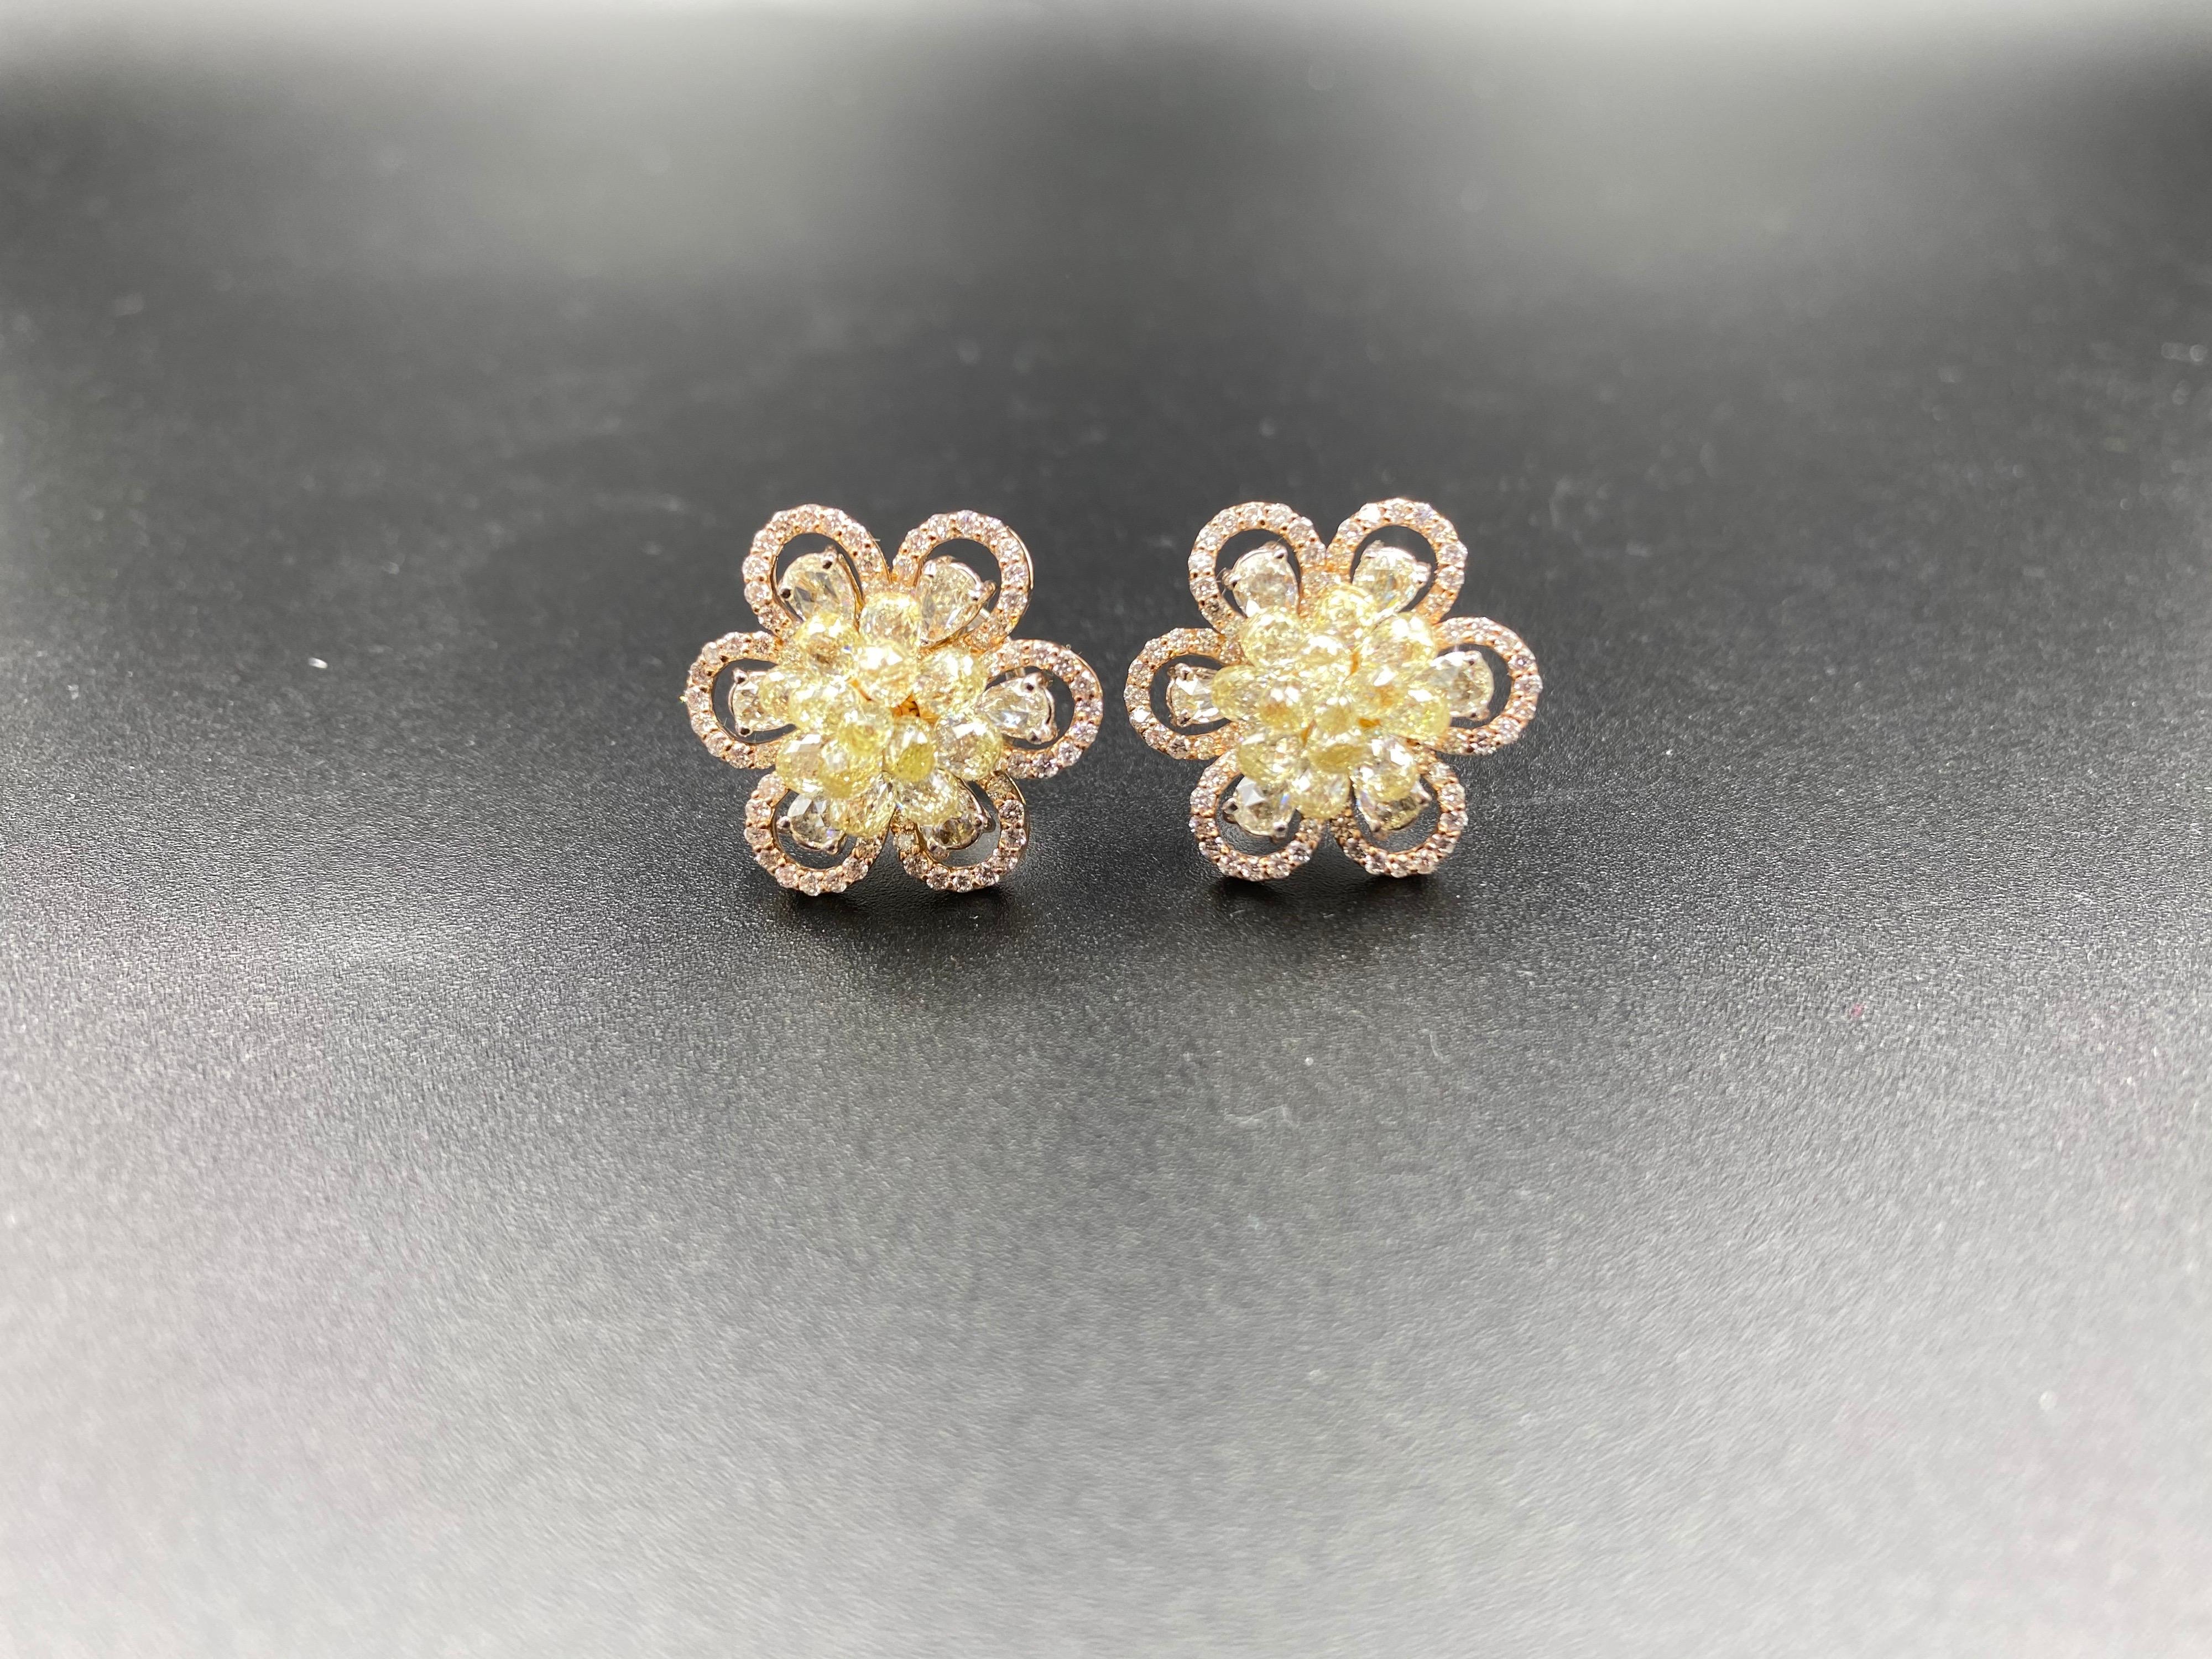 The Dusty Rose
With 5 carats of natural fancy yellow briolette centered between six rose cut diamonds, the intricate floral arrangement of The Dusty Rose earrings strikes the perfect balance between the subtle elegance of rose cut and the radiating